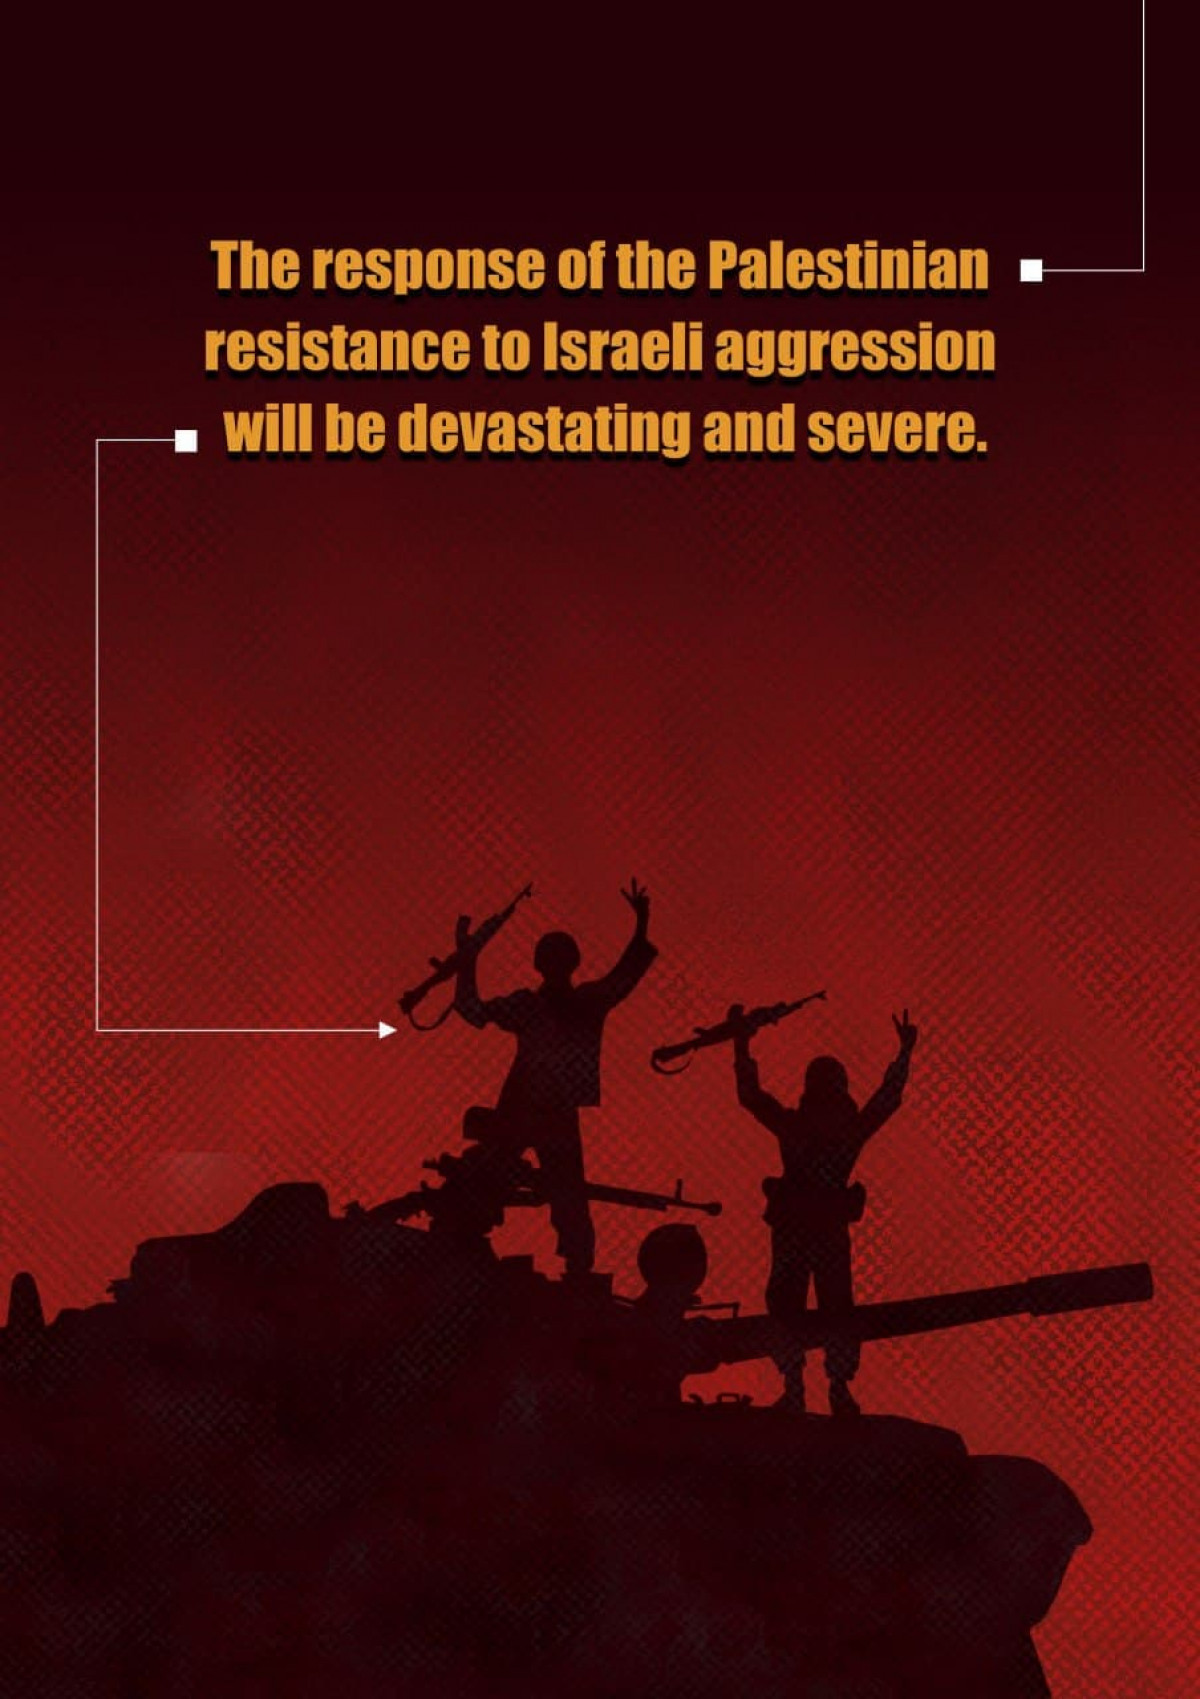 The response of the Palestinian resistance to Israeli aggression will be devastating and severe